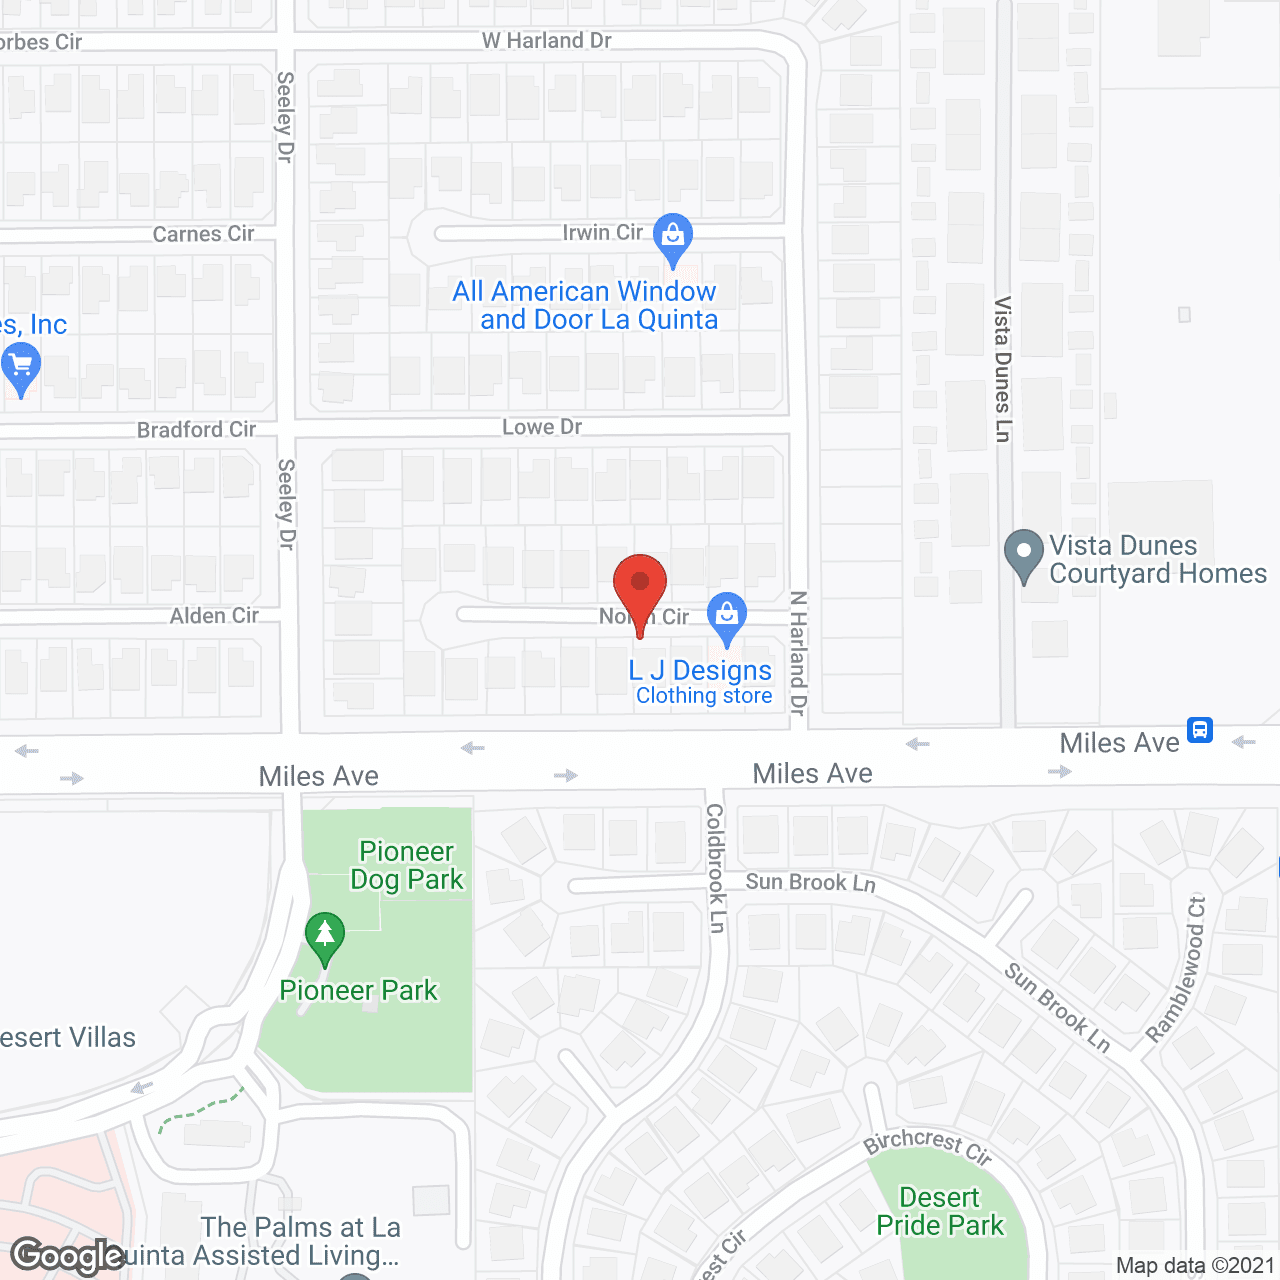 Mountainview Residential Care Facility for the Elderly in google map